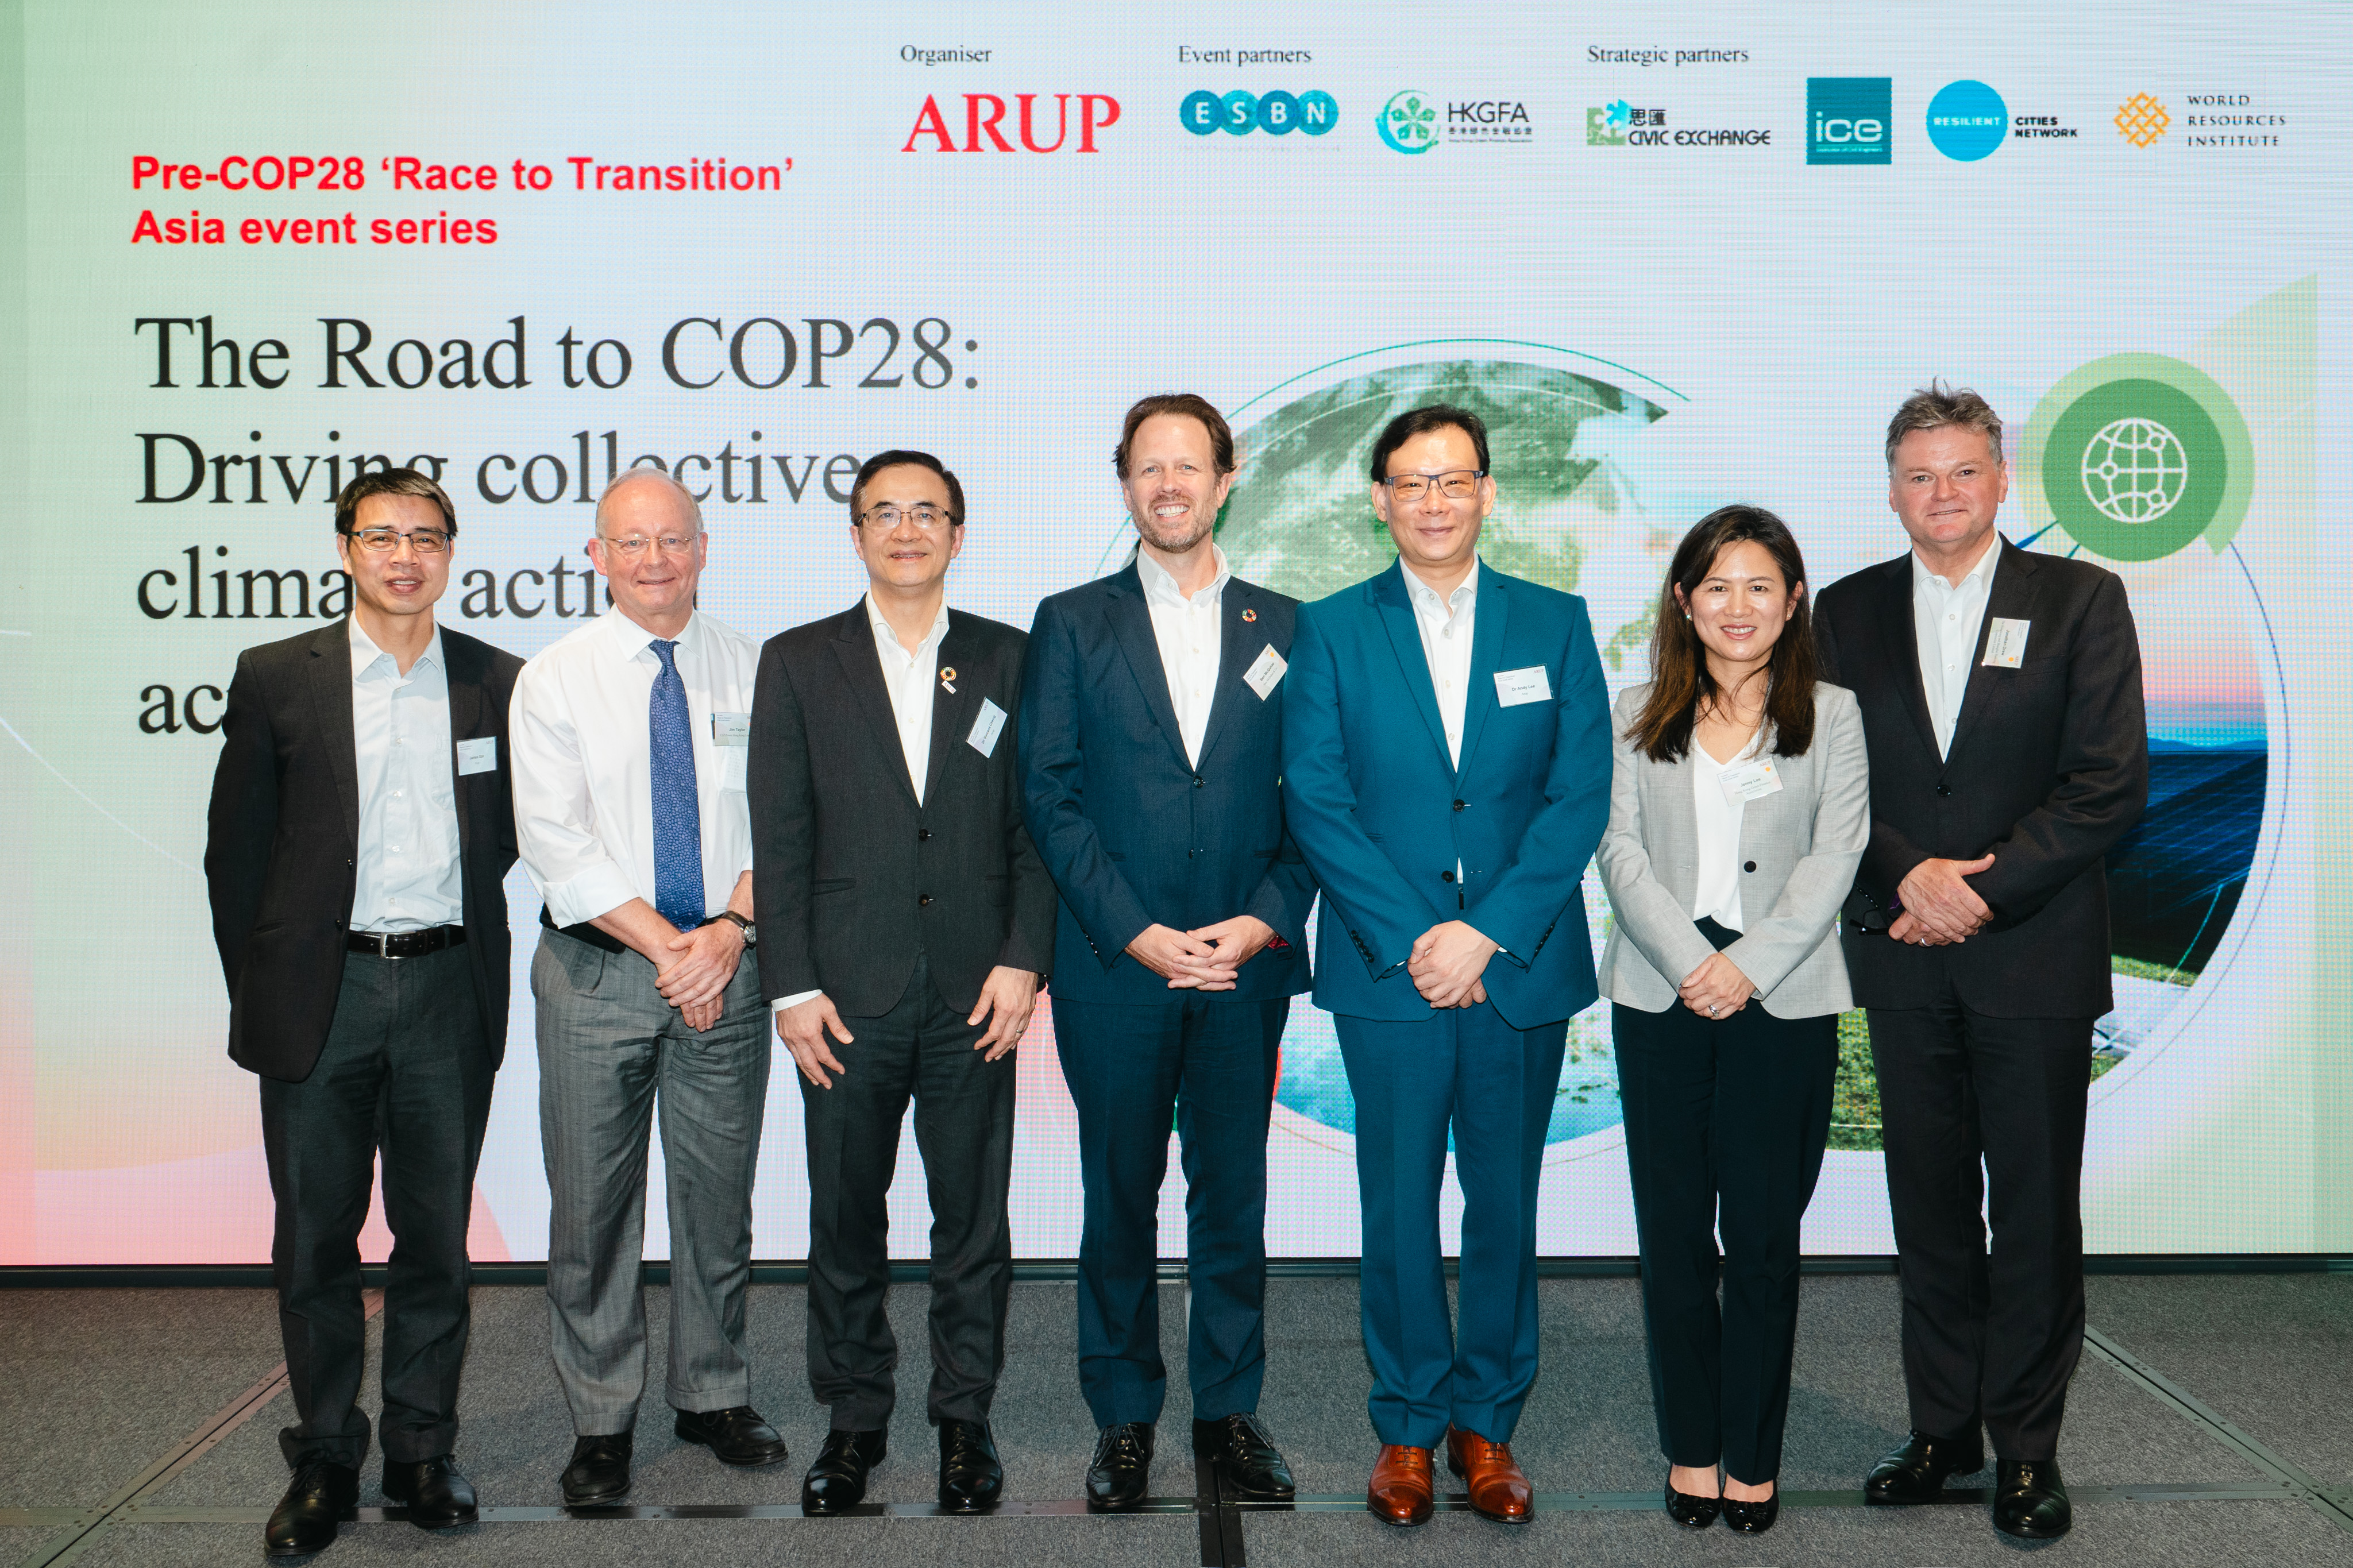 From Left to Right: James Sze, East Asia Region COO, Arup; Mr. Jim Taylor, Senior Director, Planning & Development, CLP Power Hong Kong Limited; Dr. Vincent Cheng, Fellow, Director of Climate & Sustainability Services, East Asia, Arup; Mr. Ben McQuhae, Vice President, Hong Kong Green Finance Association; Founder, Ben McQuhae & Co.; Dr Andy Lee, East Asia Region Chair, Arup; Ms. Jenny Lee, Deputy Secretary General, Hong Kong Green Finance Association; Mr. Jonathan Drew, Vice President, Hong Kong Green Finance Association; Head of Global Banking Sustainability, Asia-Pacific, The Hongkong and Shanghai Banking Corporation Limited